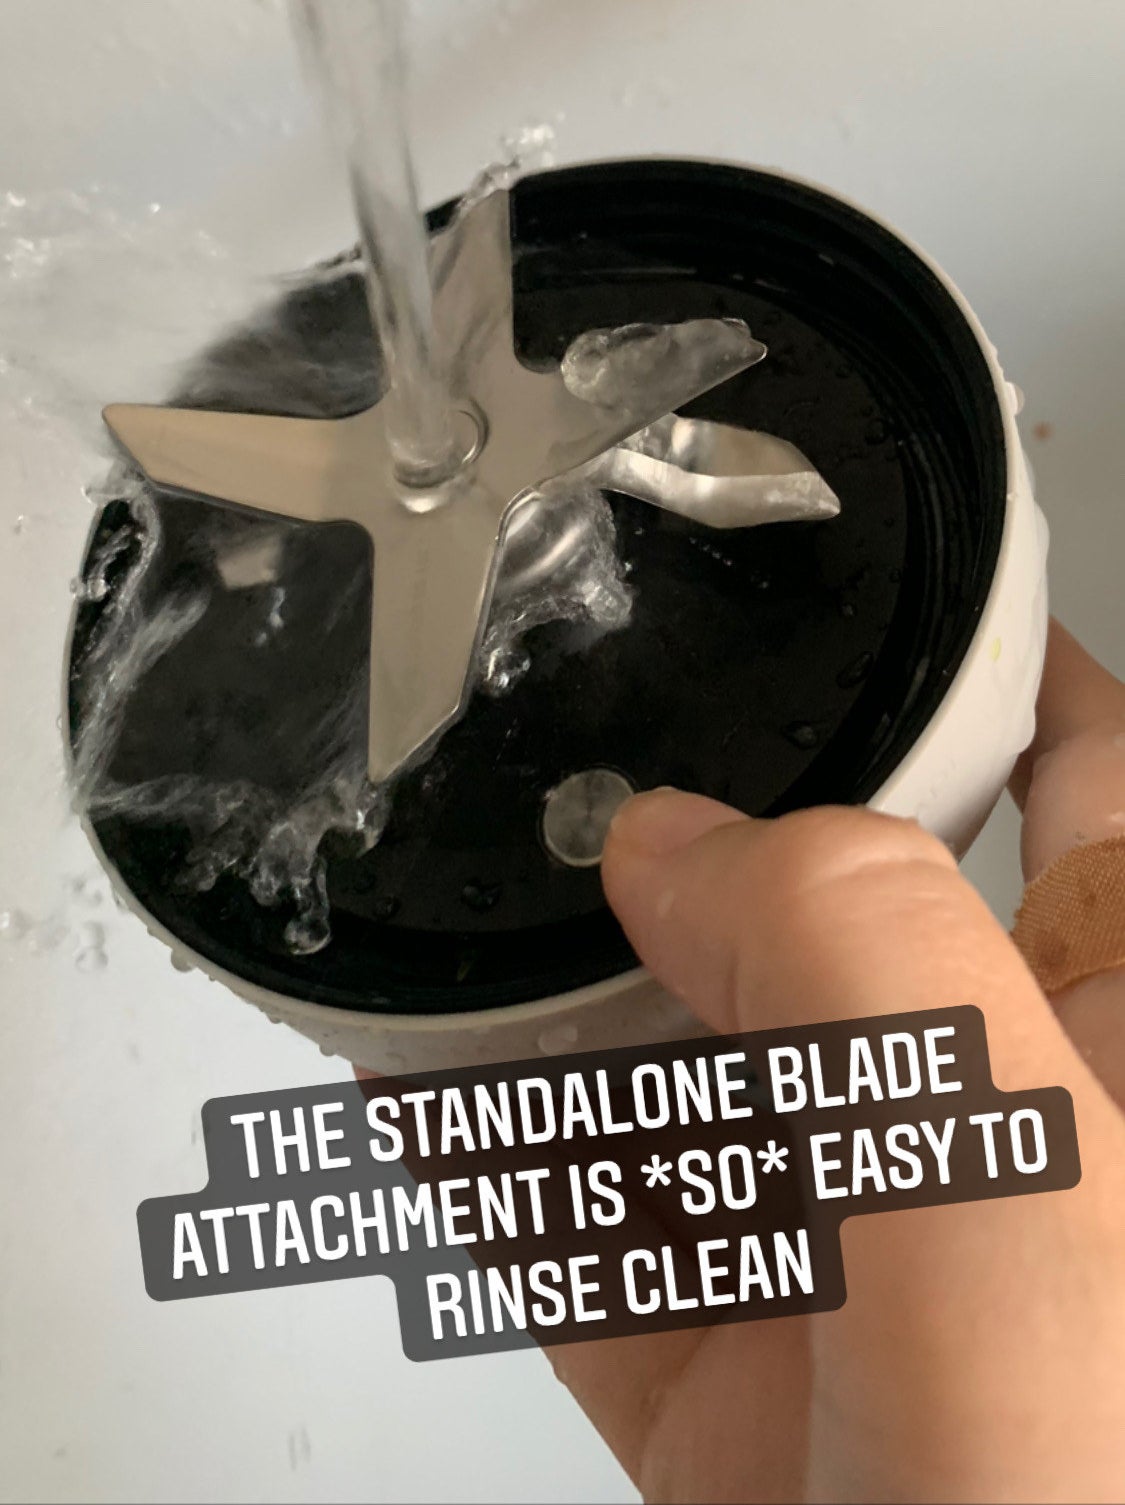 My hand holding the standalone blade attachment under a faucet to rinse clean